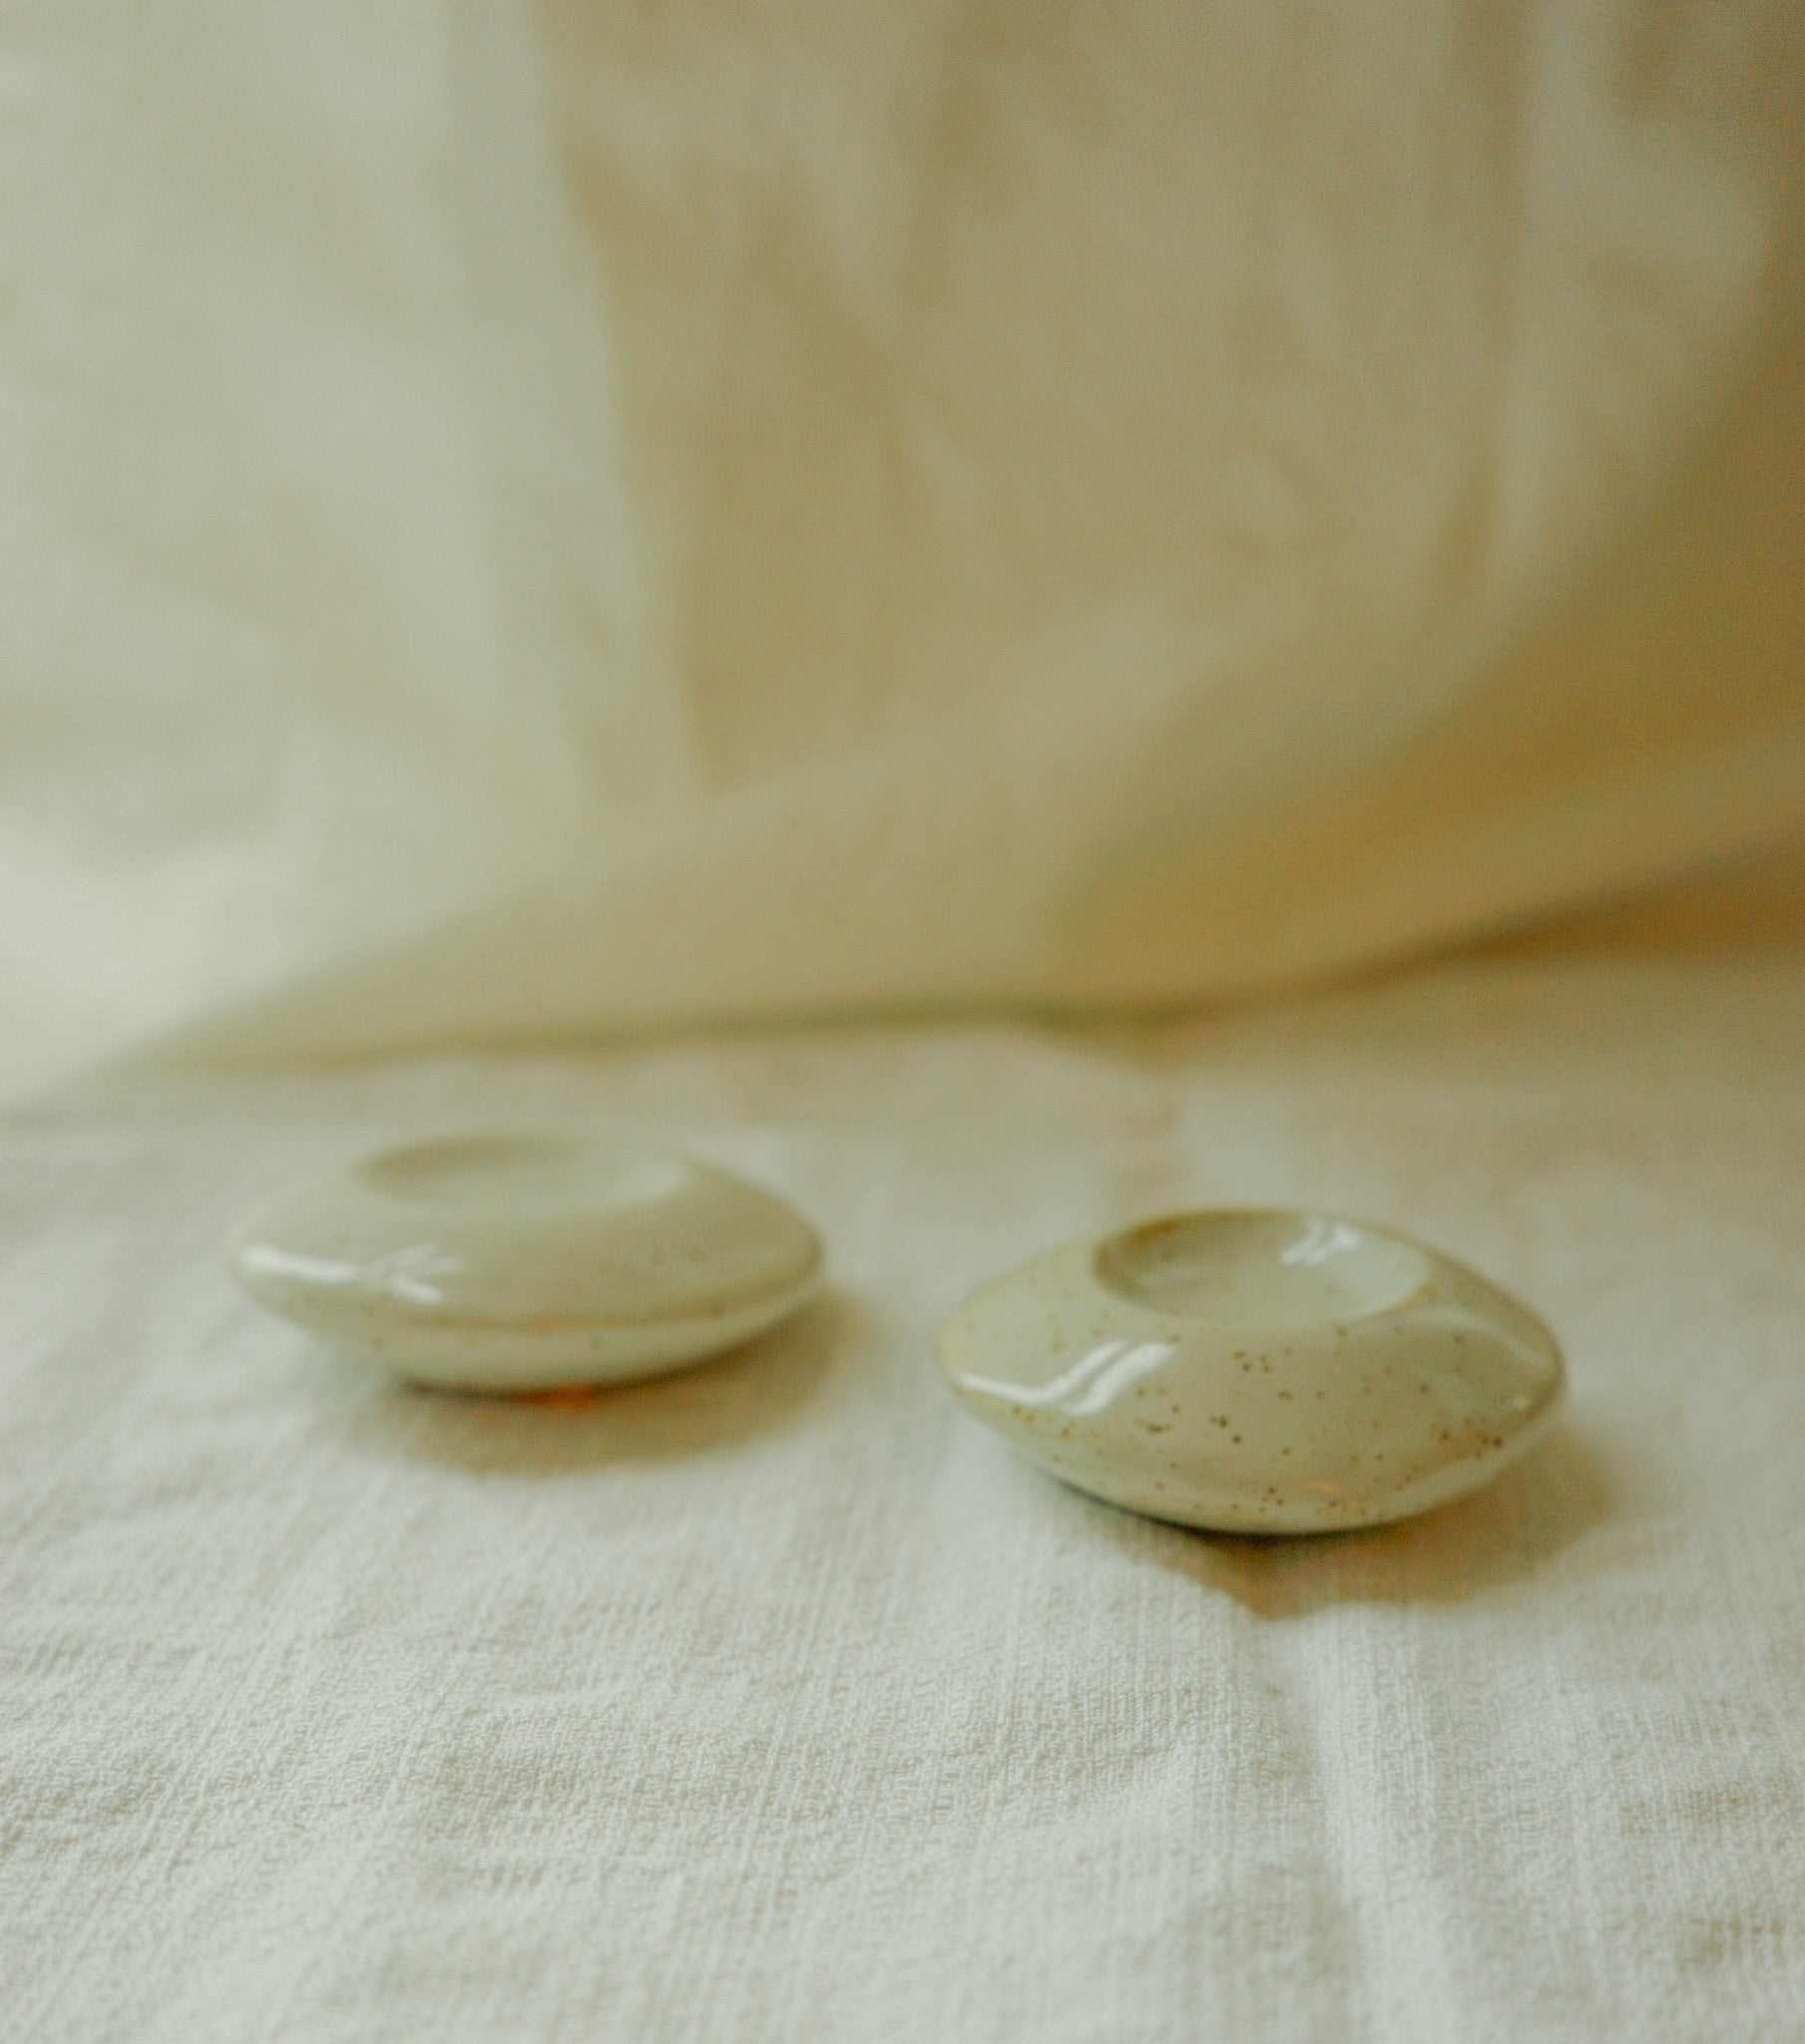 Stone dimple dishes